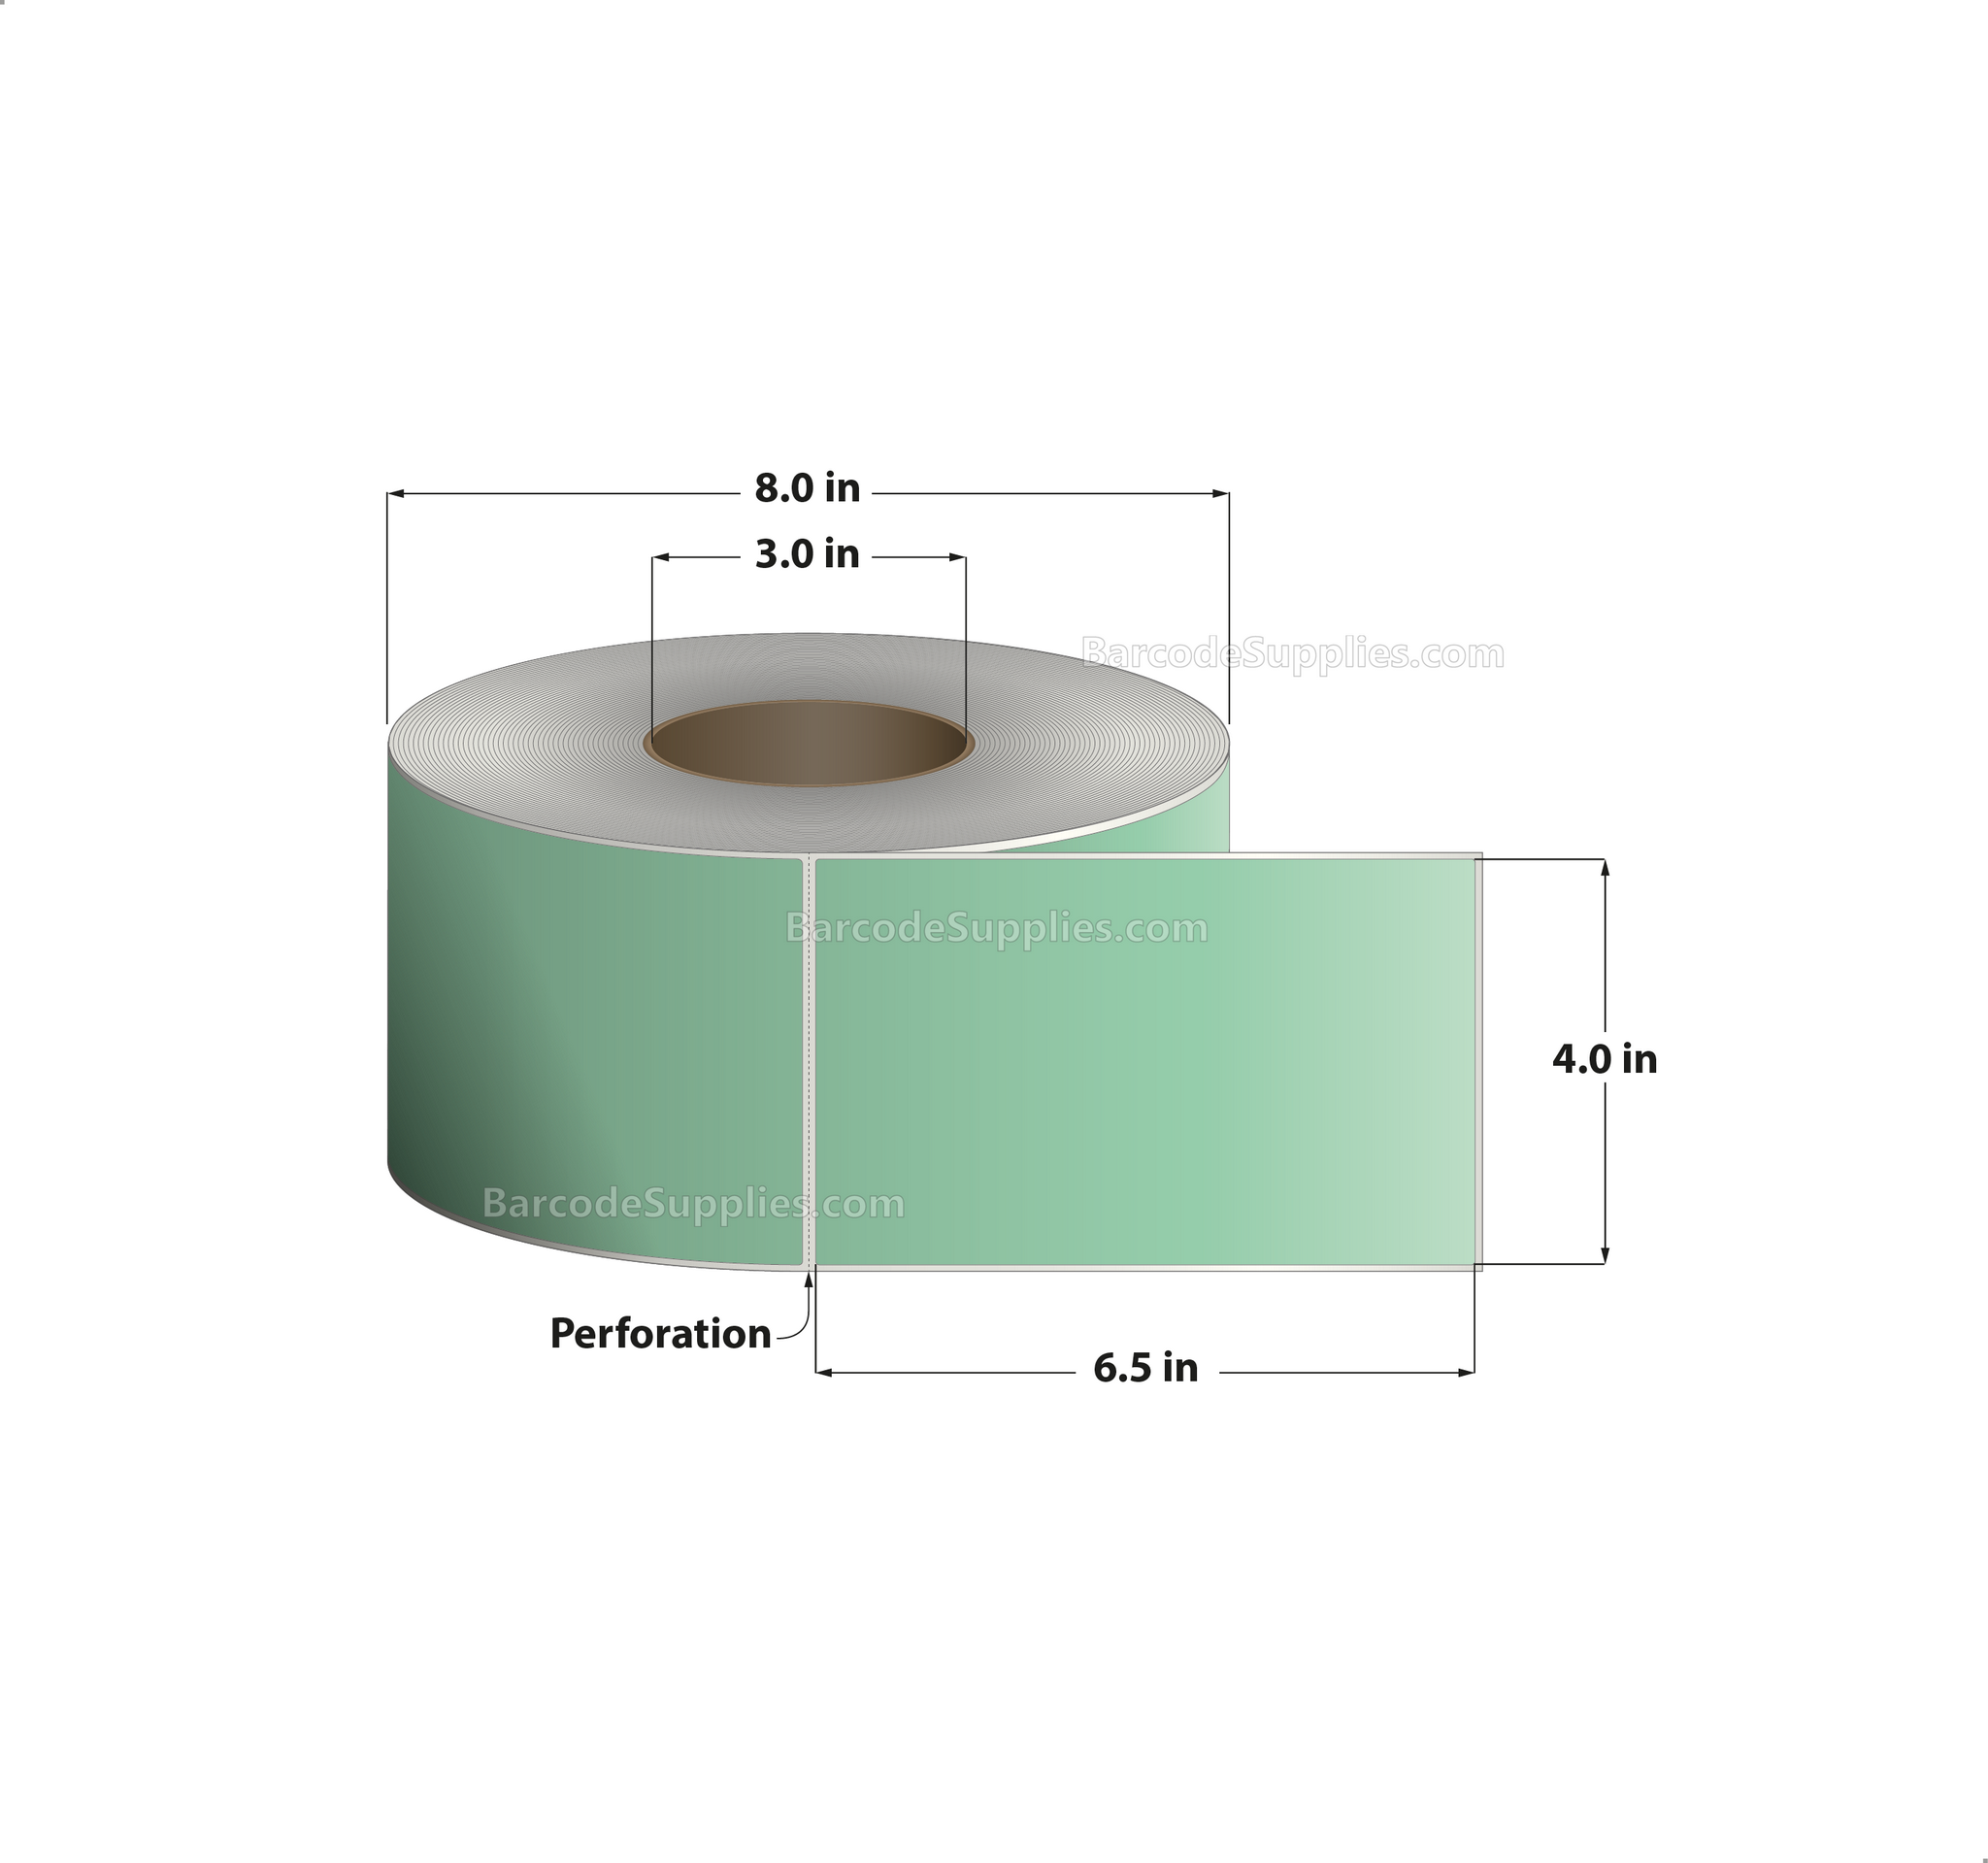 4 x 6.5 Thermal Transfer 345 Green Labels With Permanent Adhesive - Perforated - 900 Labels Per Roll - Carton Of 4 Rolls - 3600 Labels Total - MPN: RFC-4-65-900-GR